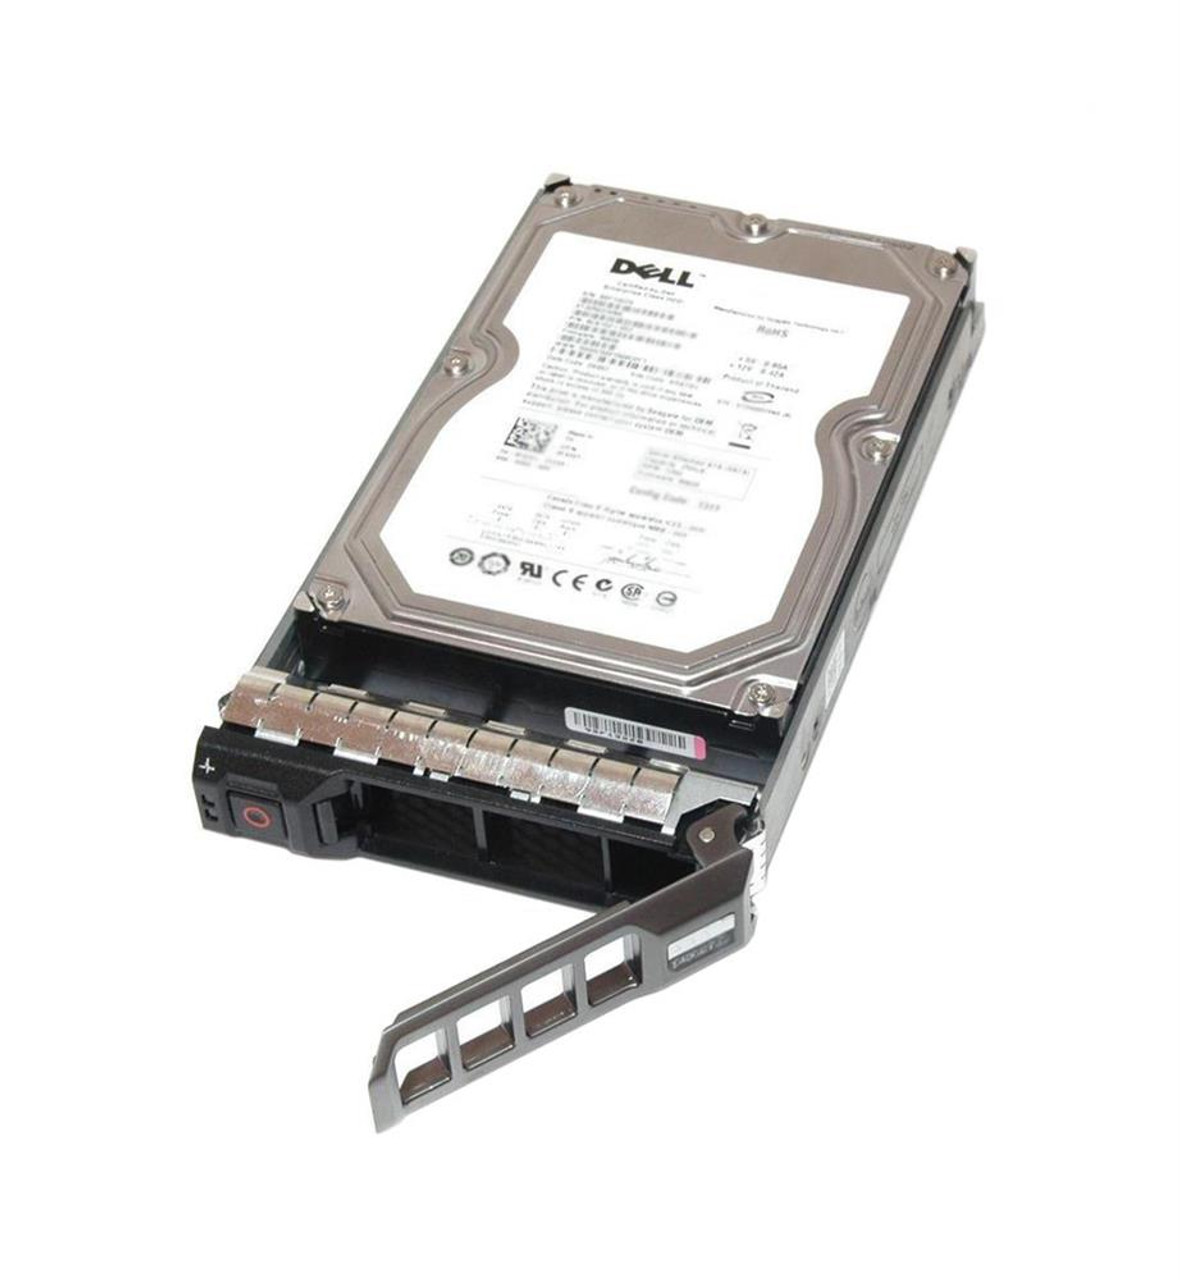 0PRDN7 Dell 8TB 7200RPM SAS 12Gbps Nearline Hot Swap (512e) 3.5-inch Internal Hard Drive with Tray